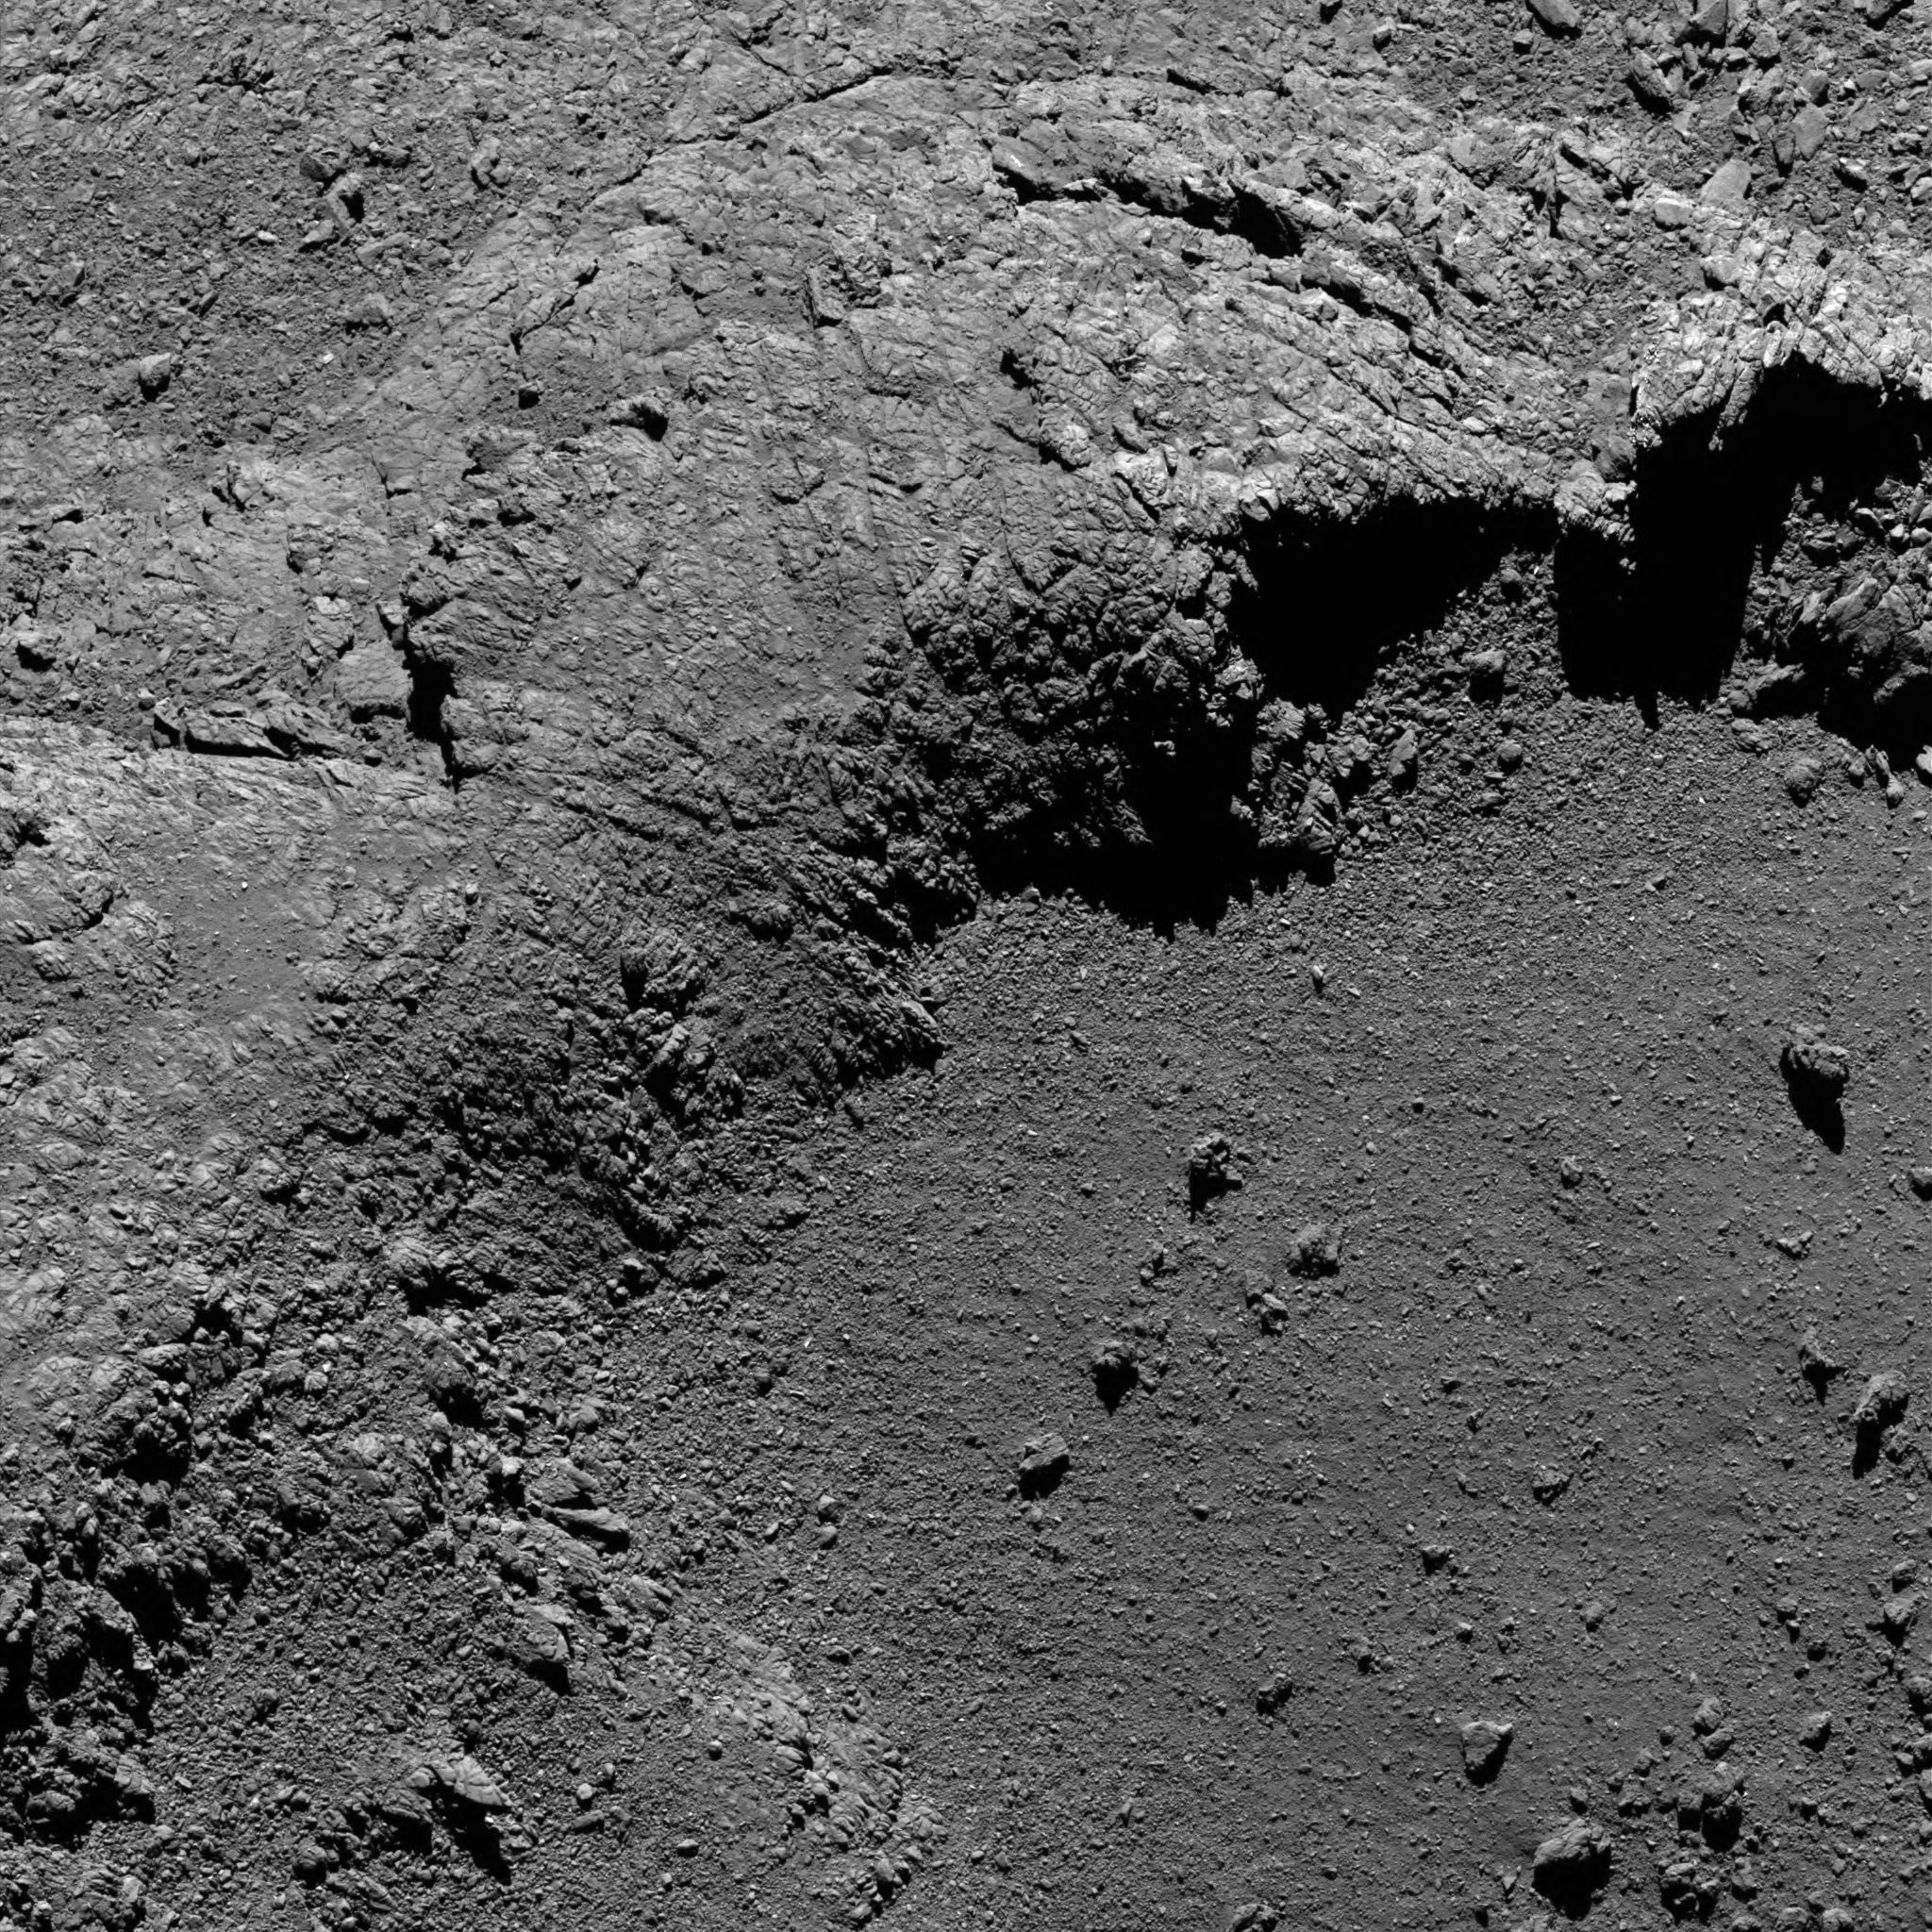 Comet close-up, August 30, 2016 | The Planetary Society